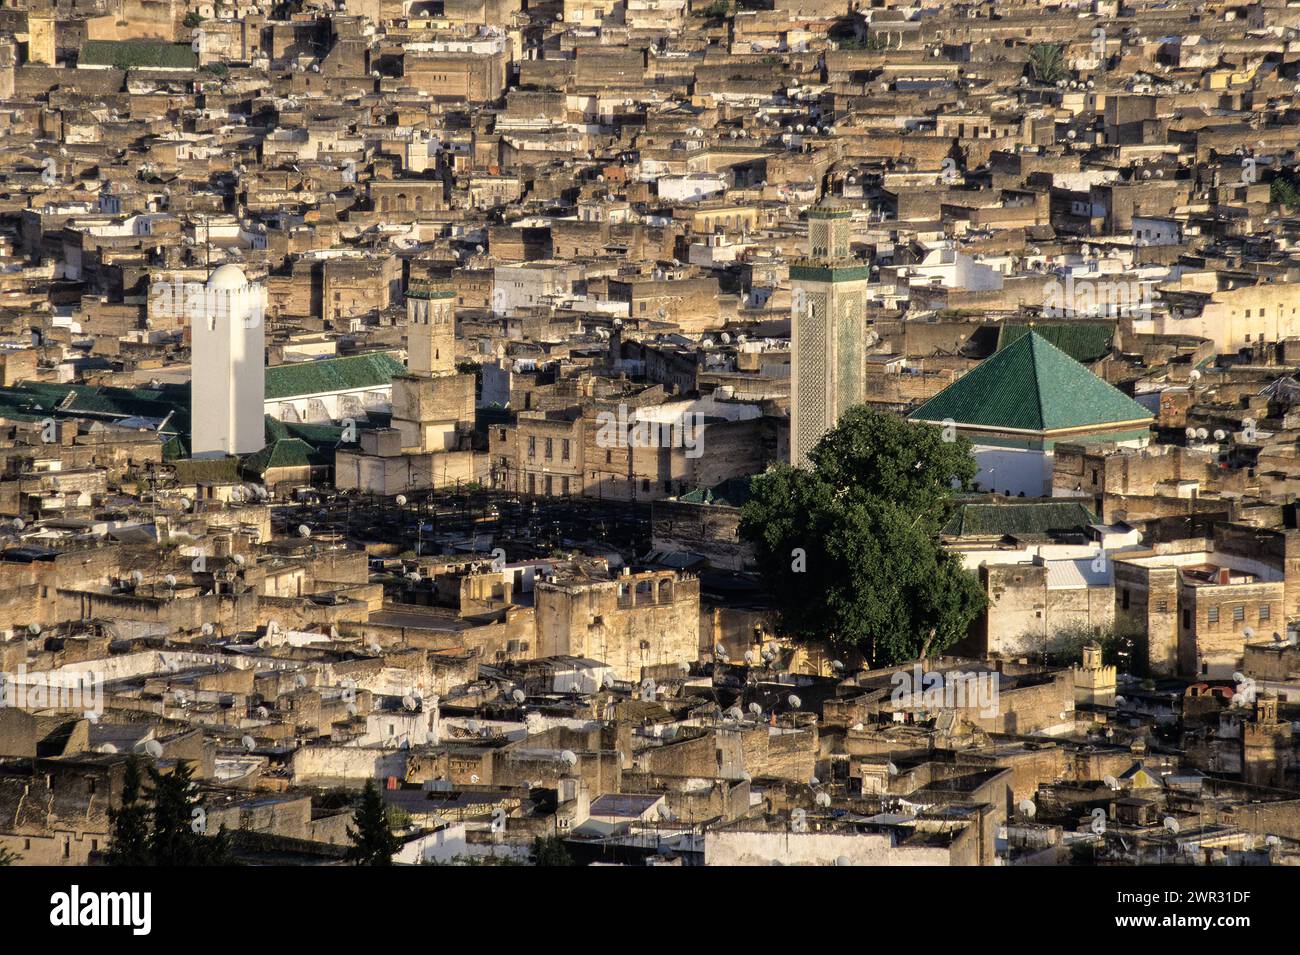 Fez, Morocco -  Fez El-Bali.  Behind the White Minaret is the Kairouyine (Karaouiyine) Mosque; to the right is the Zawiya of Moulay Idris II. Stock Photo